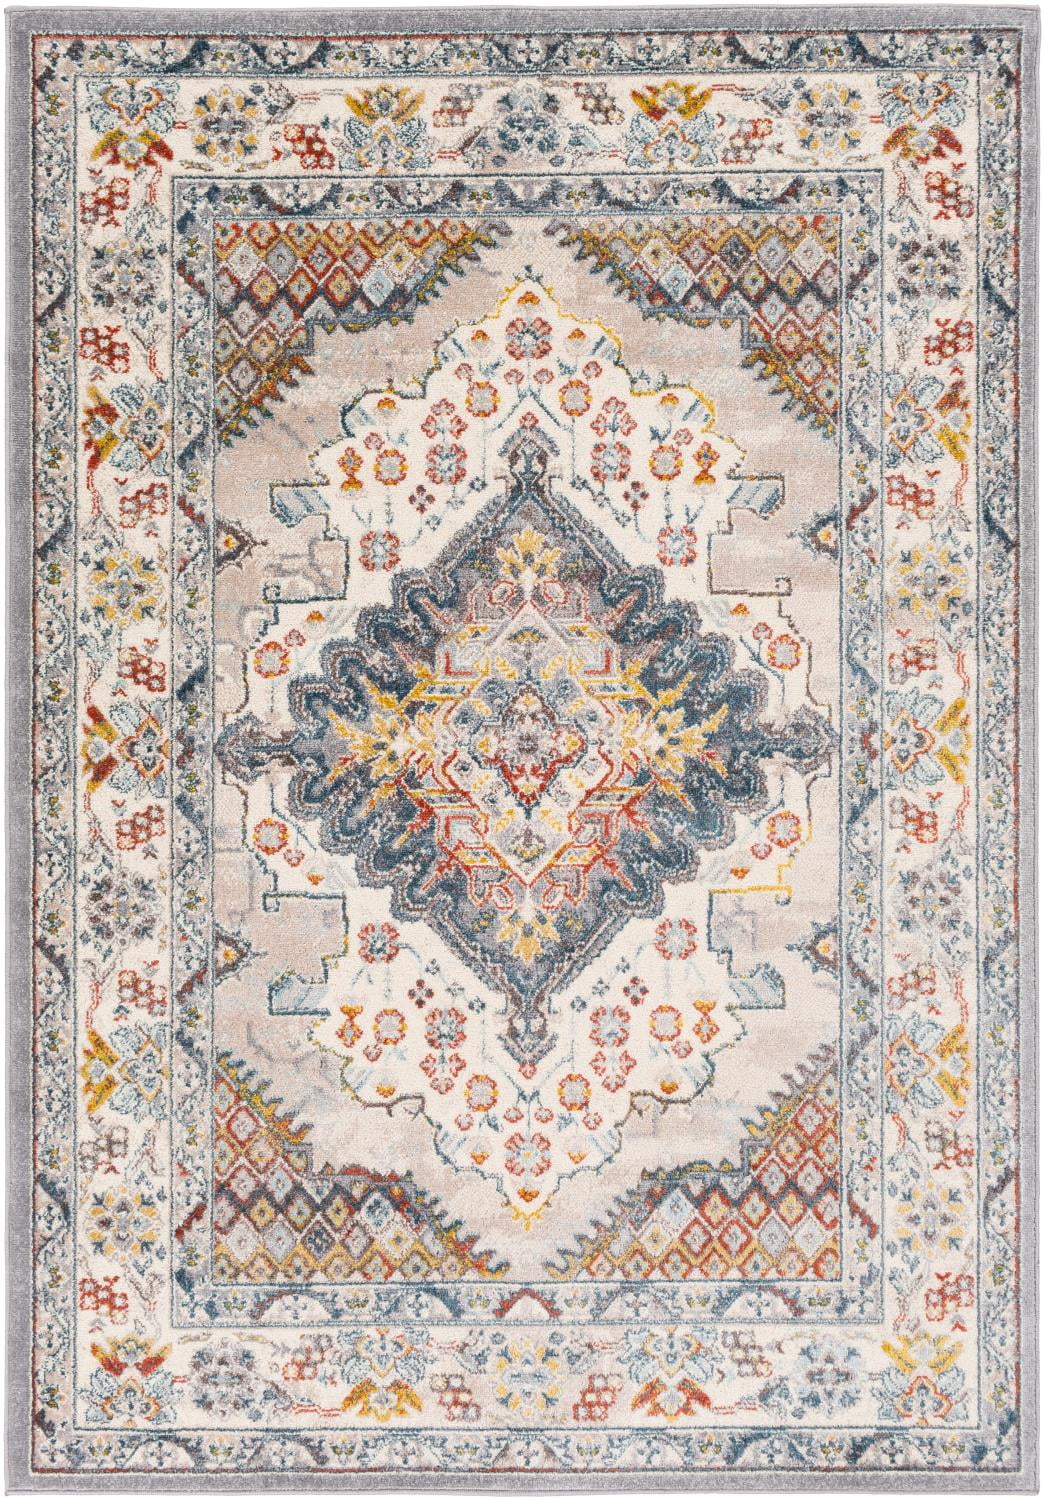 XL 80x500cm **FREE DELIVERY SULIS FLORAL MEDALLION BLUE TRADITIONAL RUG RUNNER 